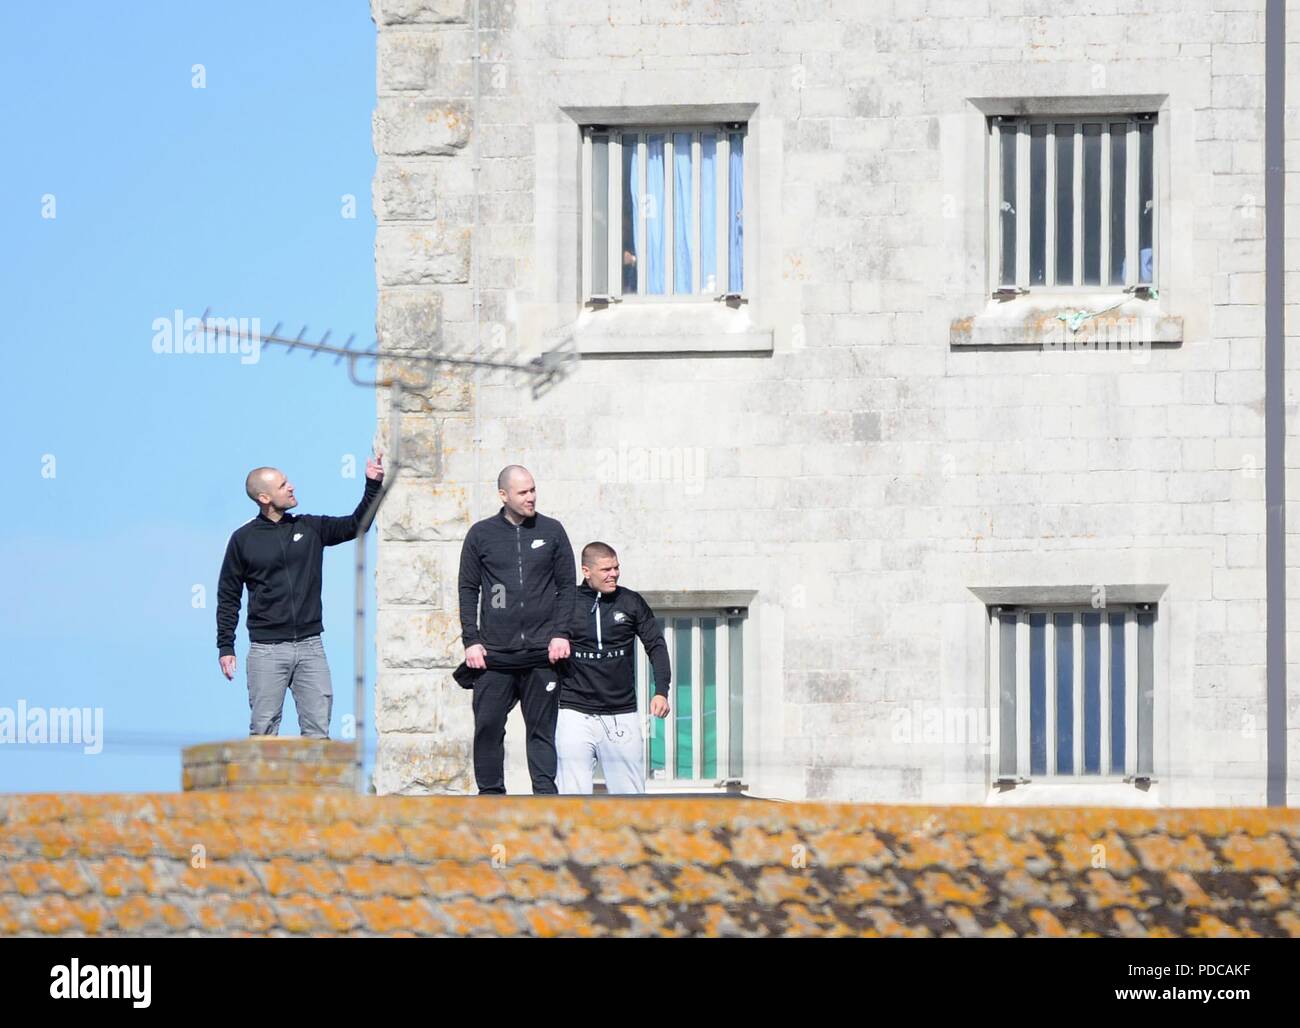 Prison protest, Three prisoners protest on the rooftop of HM Prison Portland, Young Offenders Institution, Portland, Dorset, UK Credit: Finnbarr Webster/Alamy Live News Stock Photo